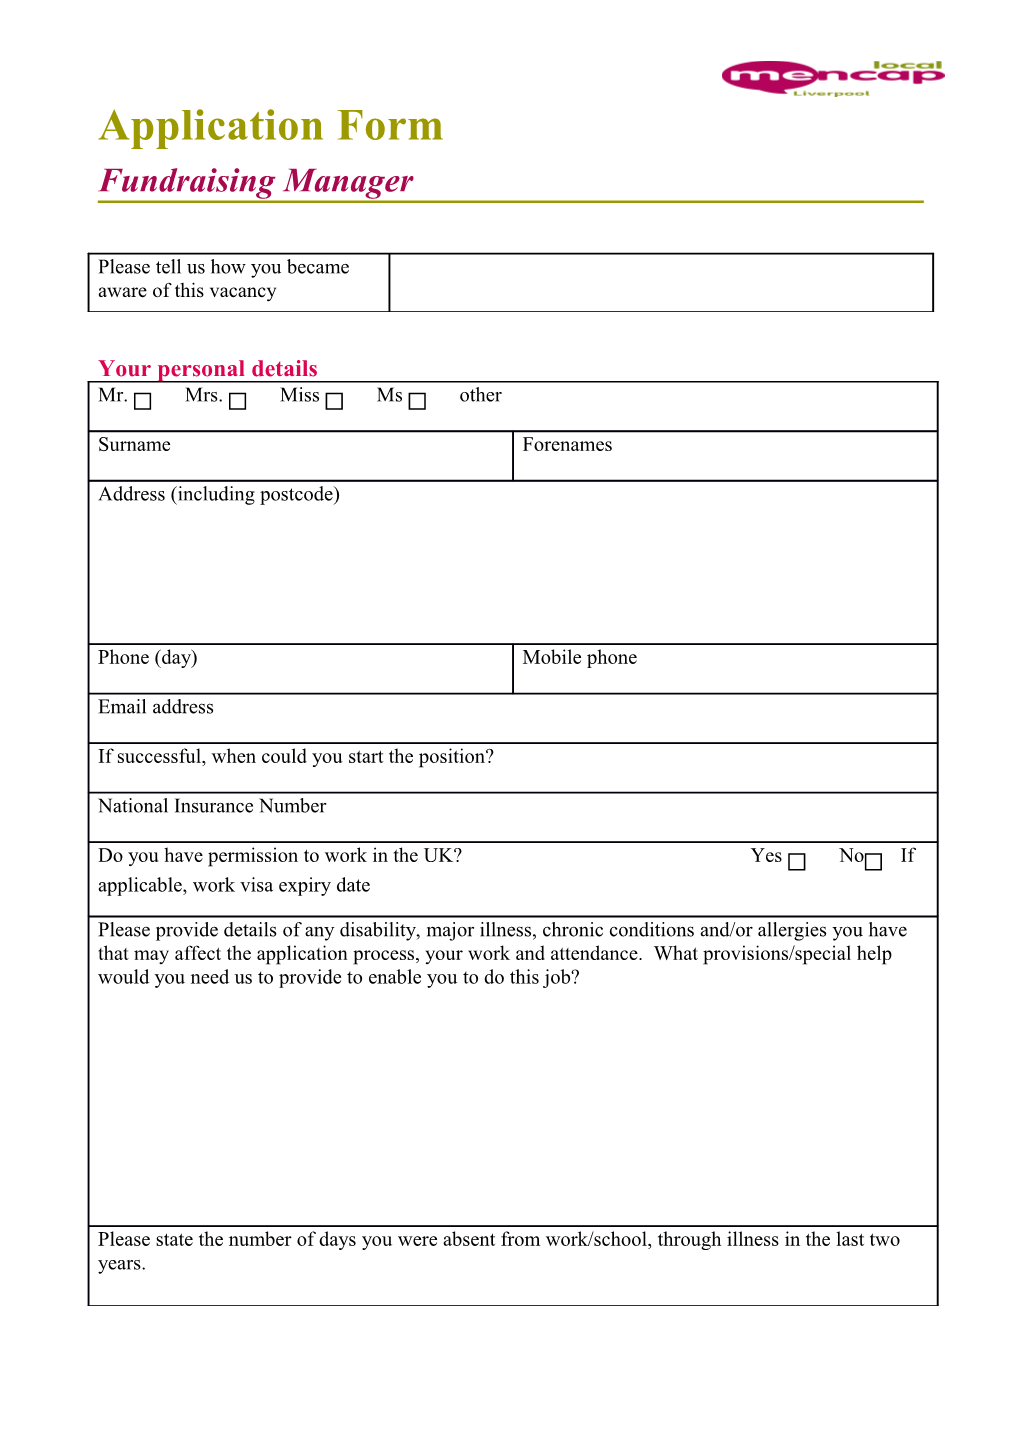 Application Form s99